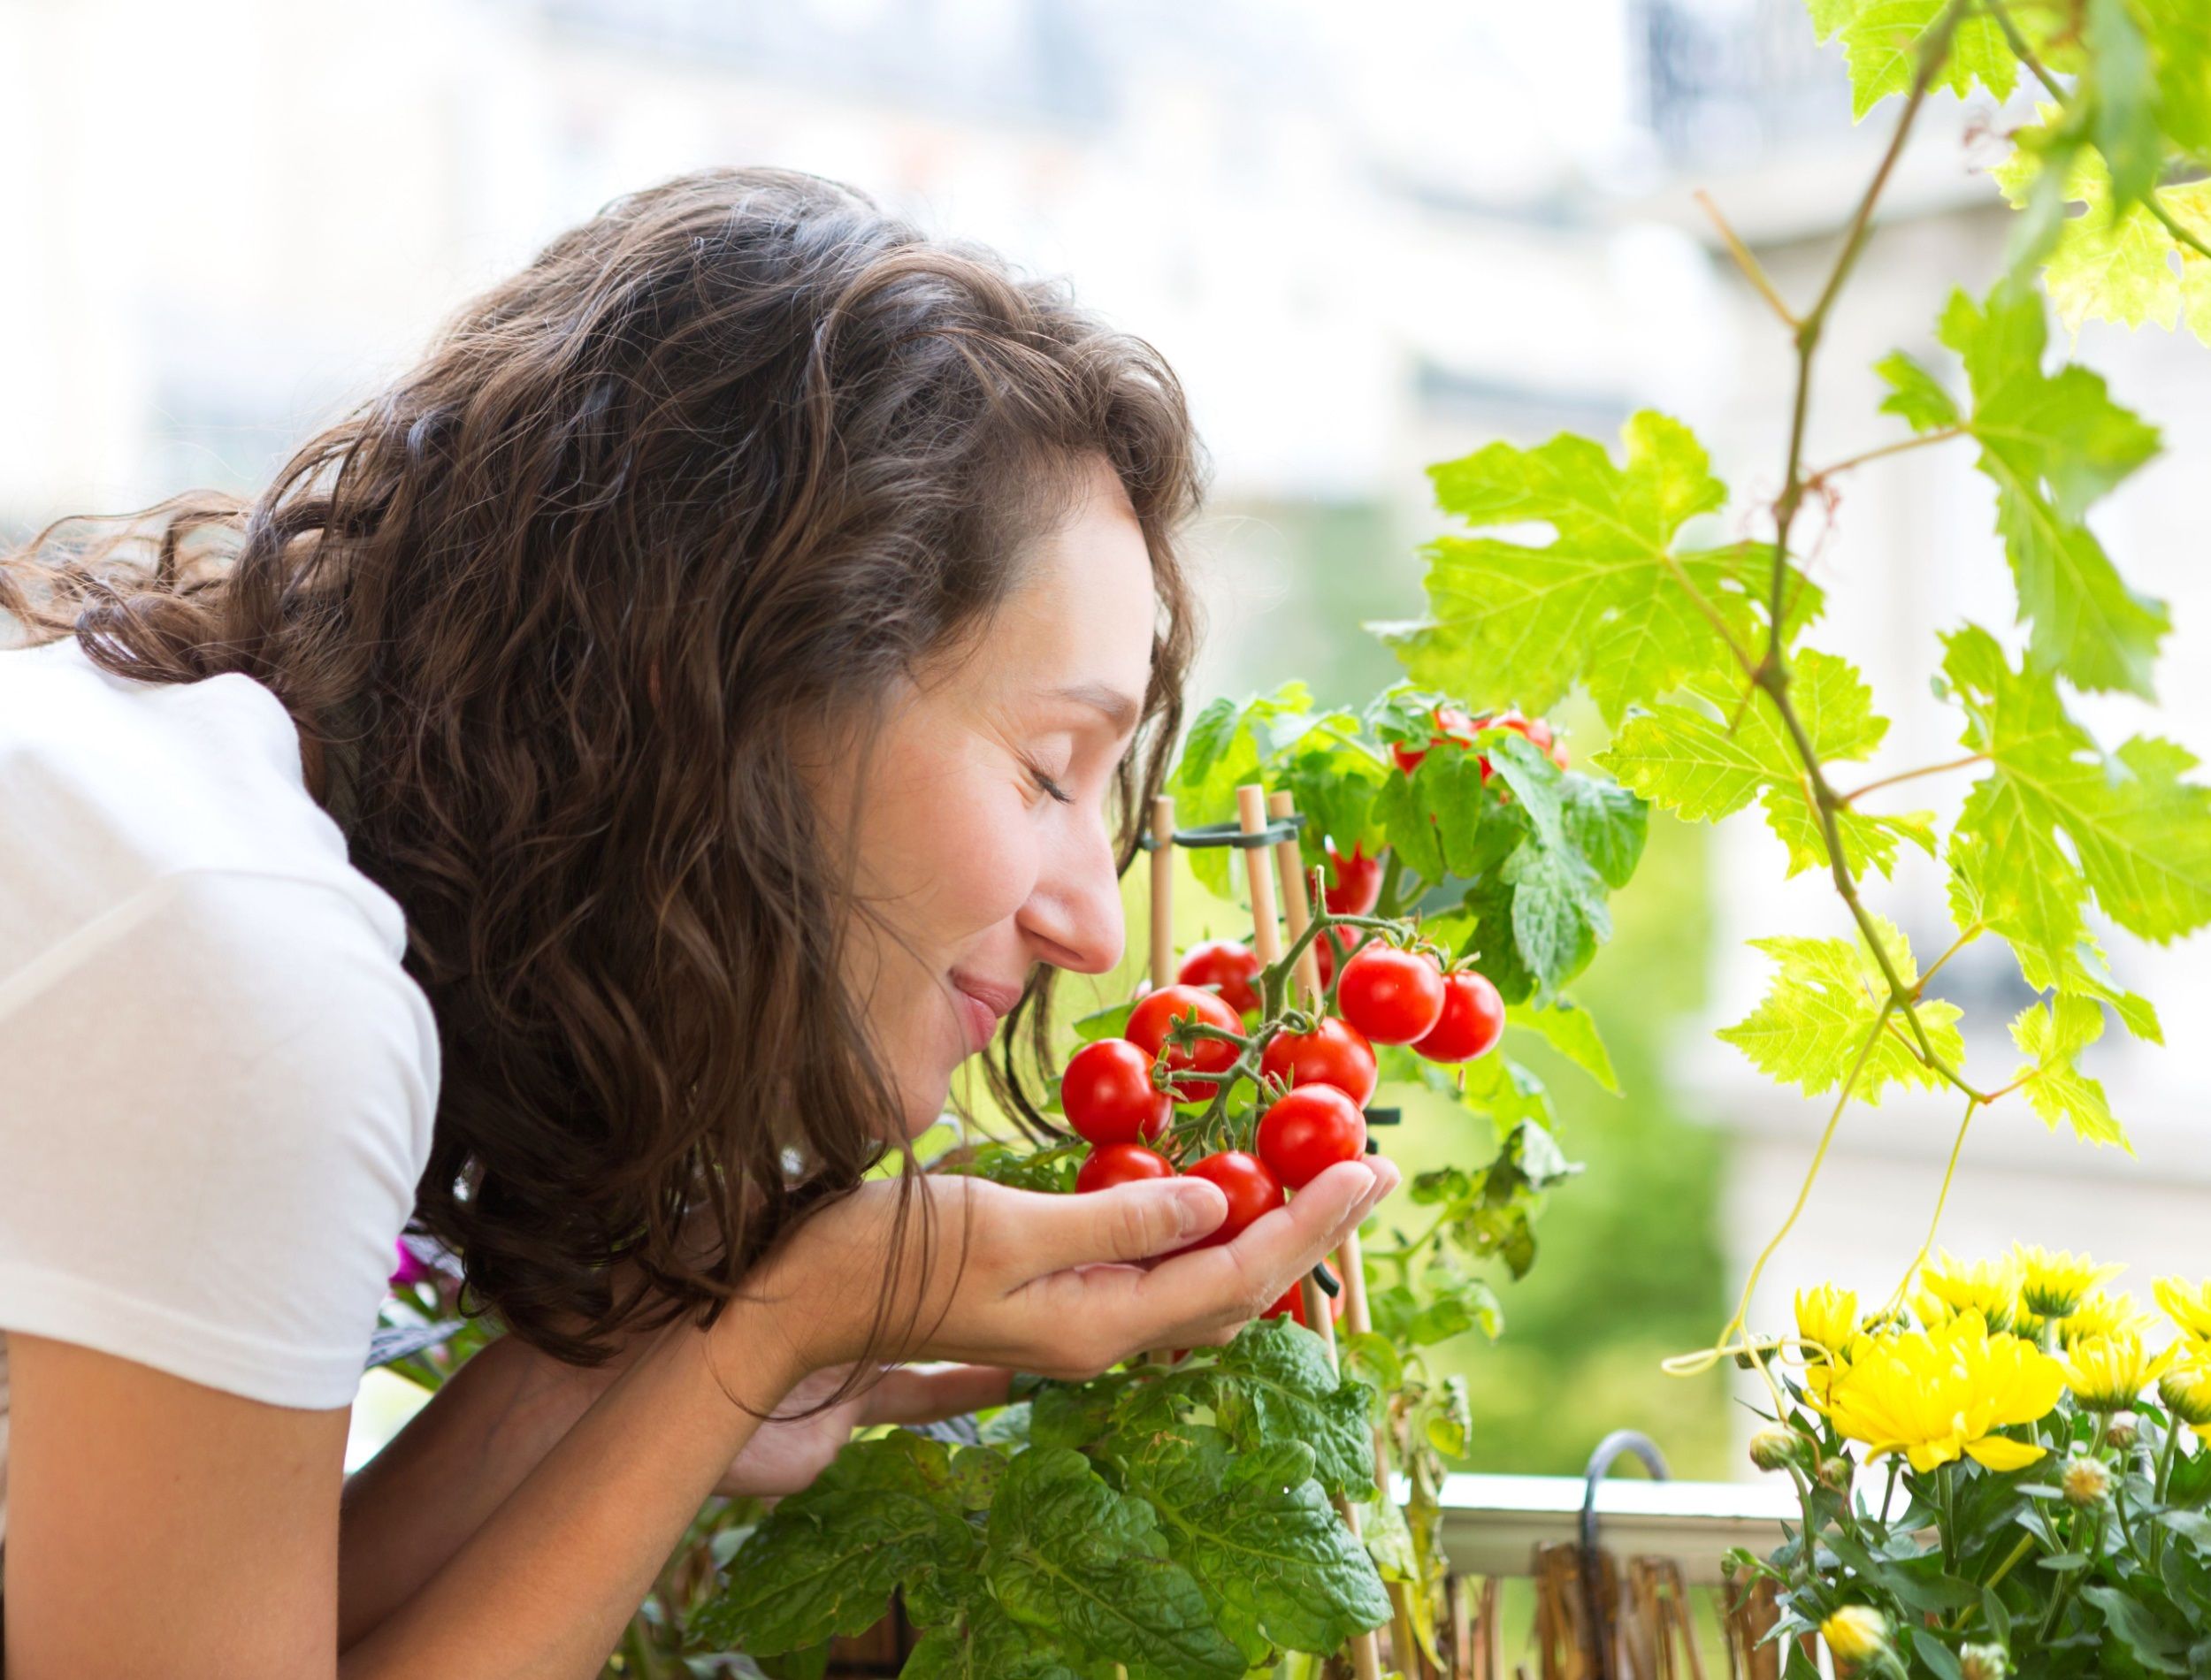 View of a Young woman taking care of her plants and vegetables on her city balcony garden - Environment and ecology theme